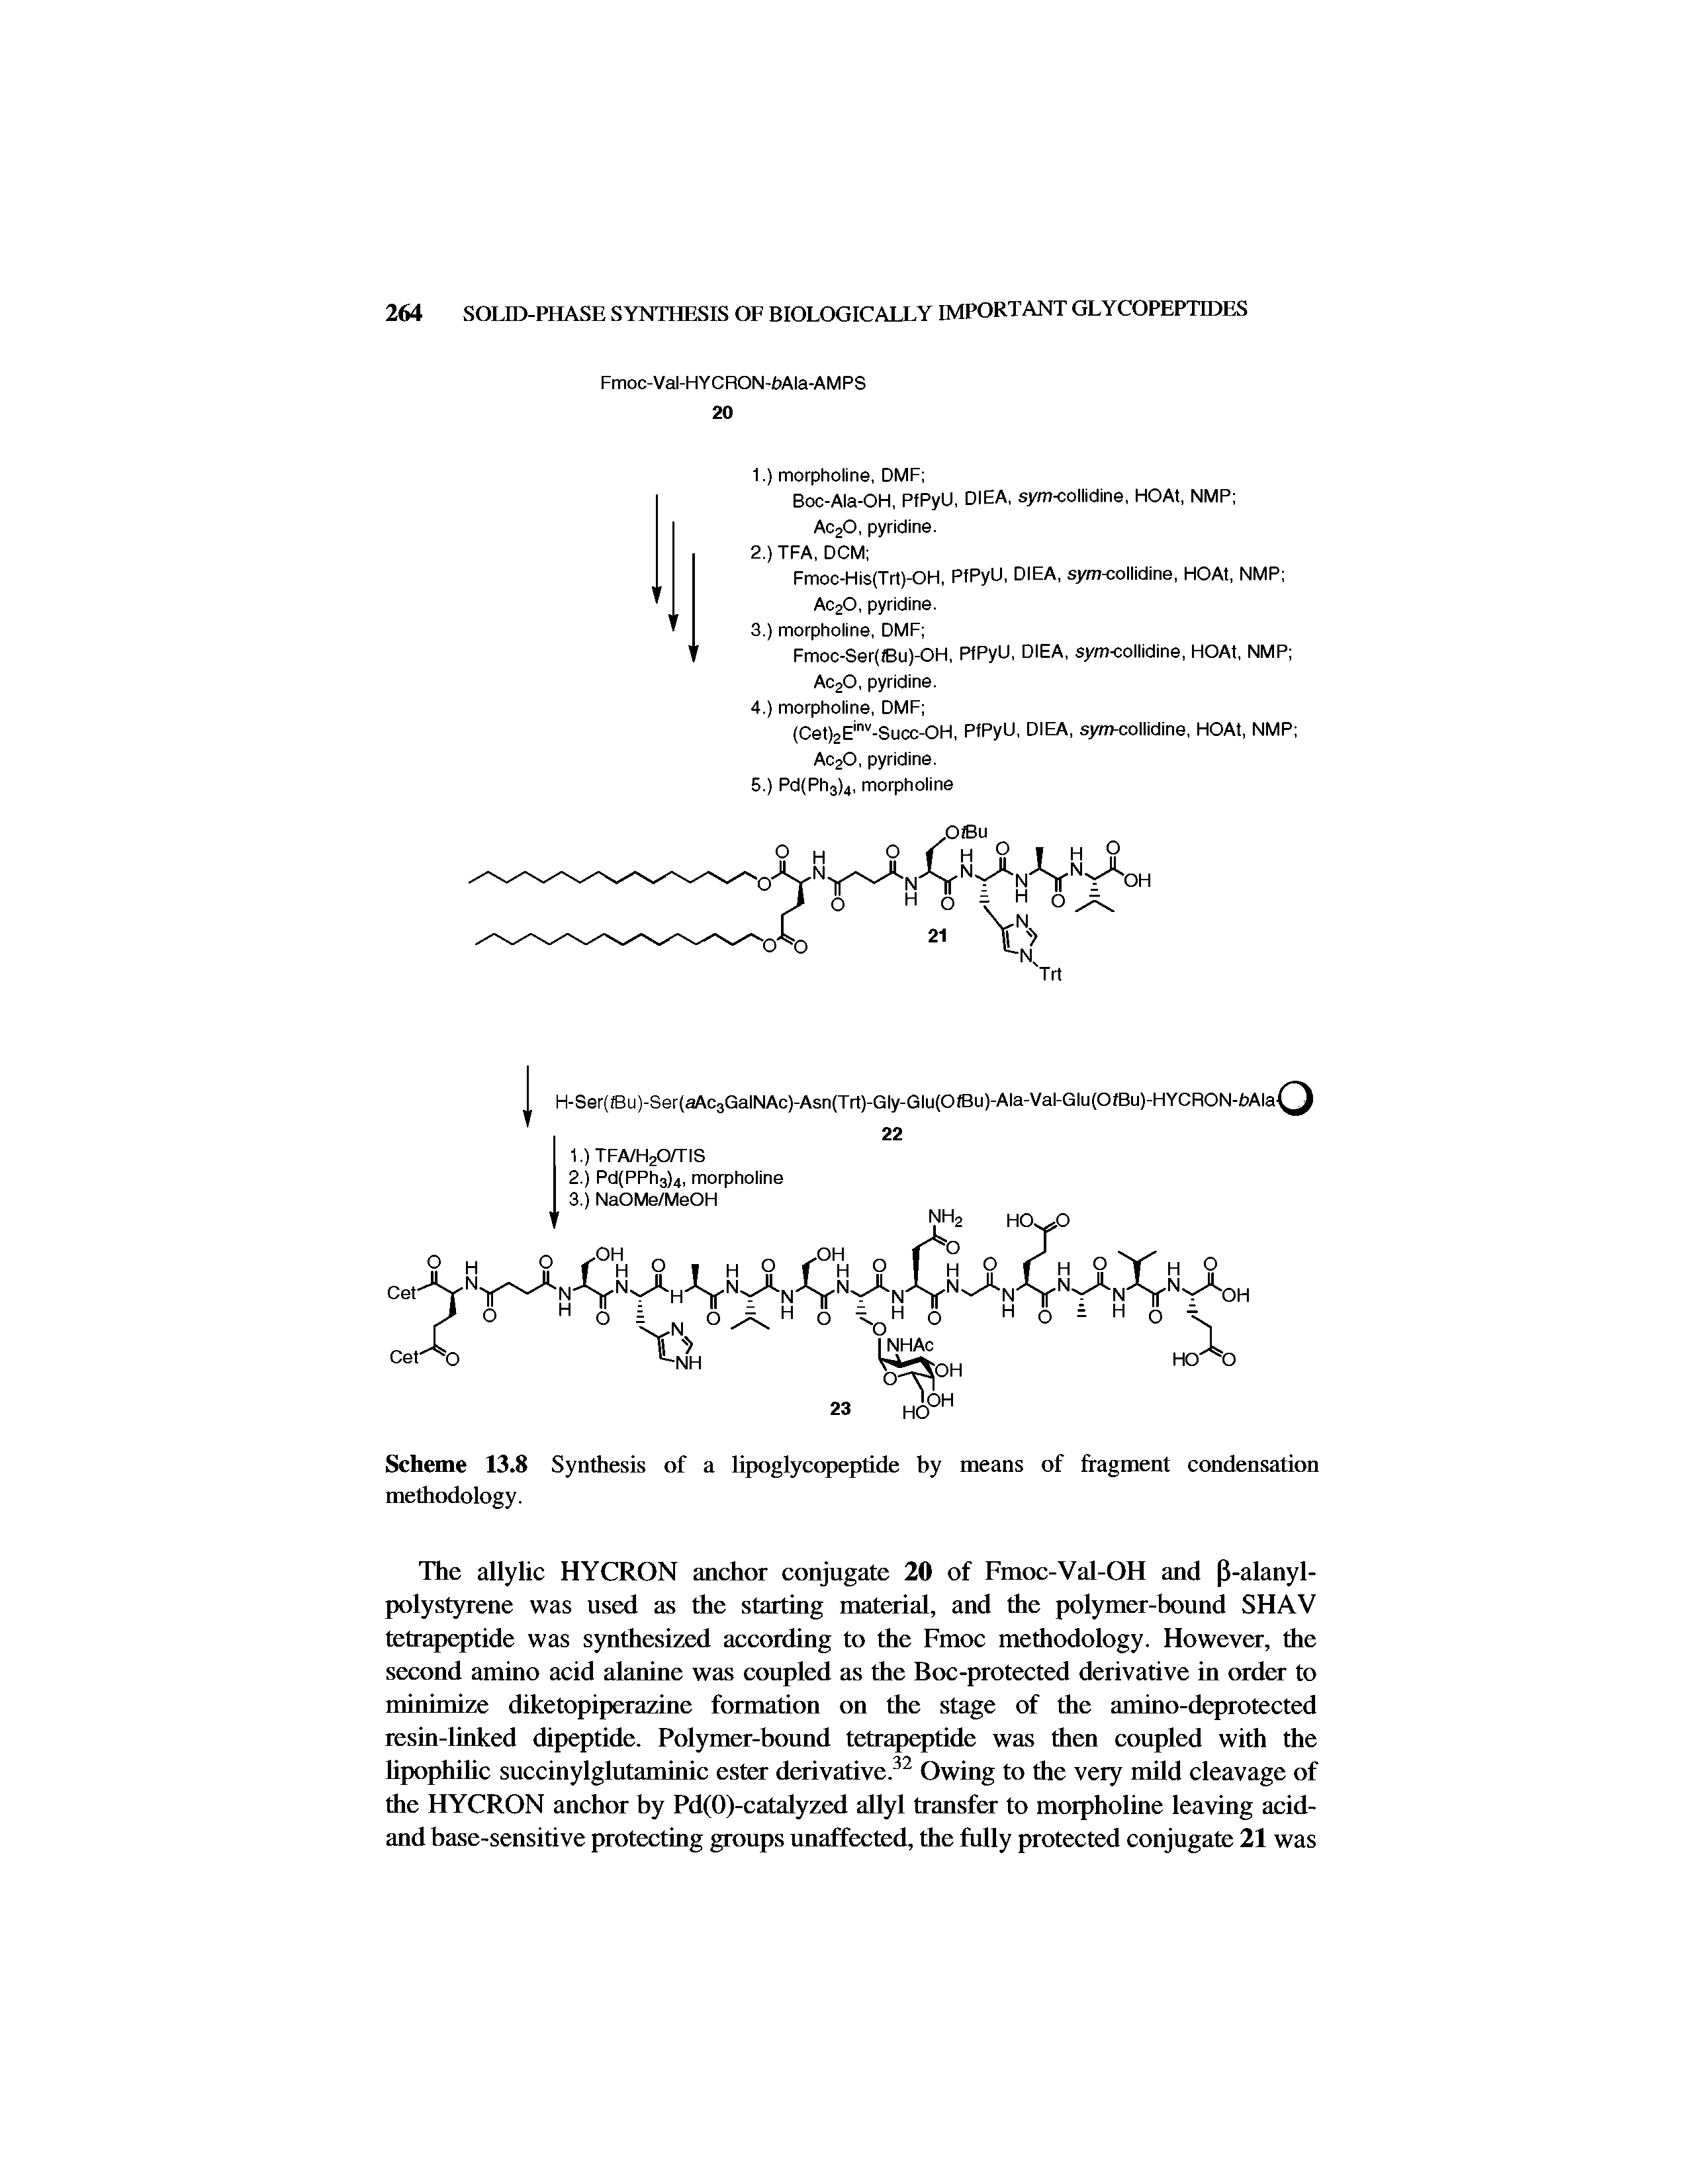 Scheme 13.8 Synthesis of a lipoglycopeptide by means of fragment condensation methodology.